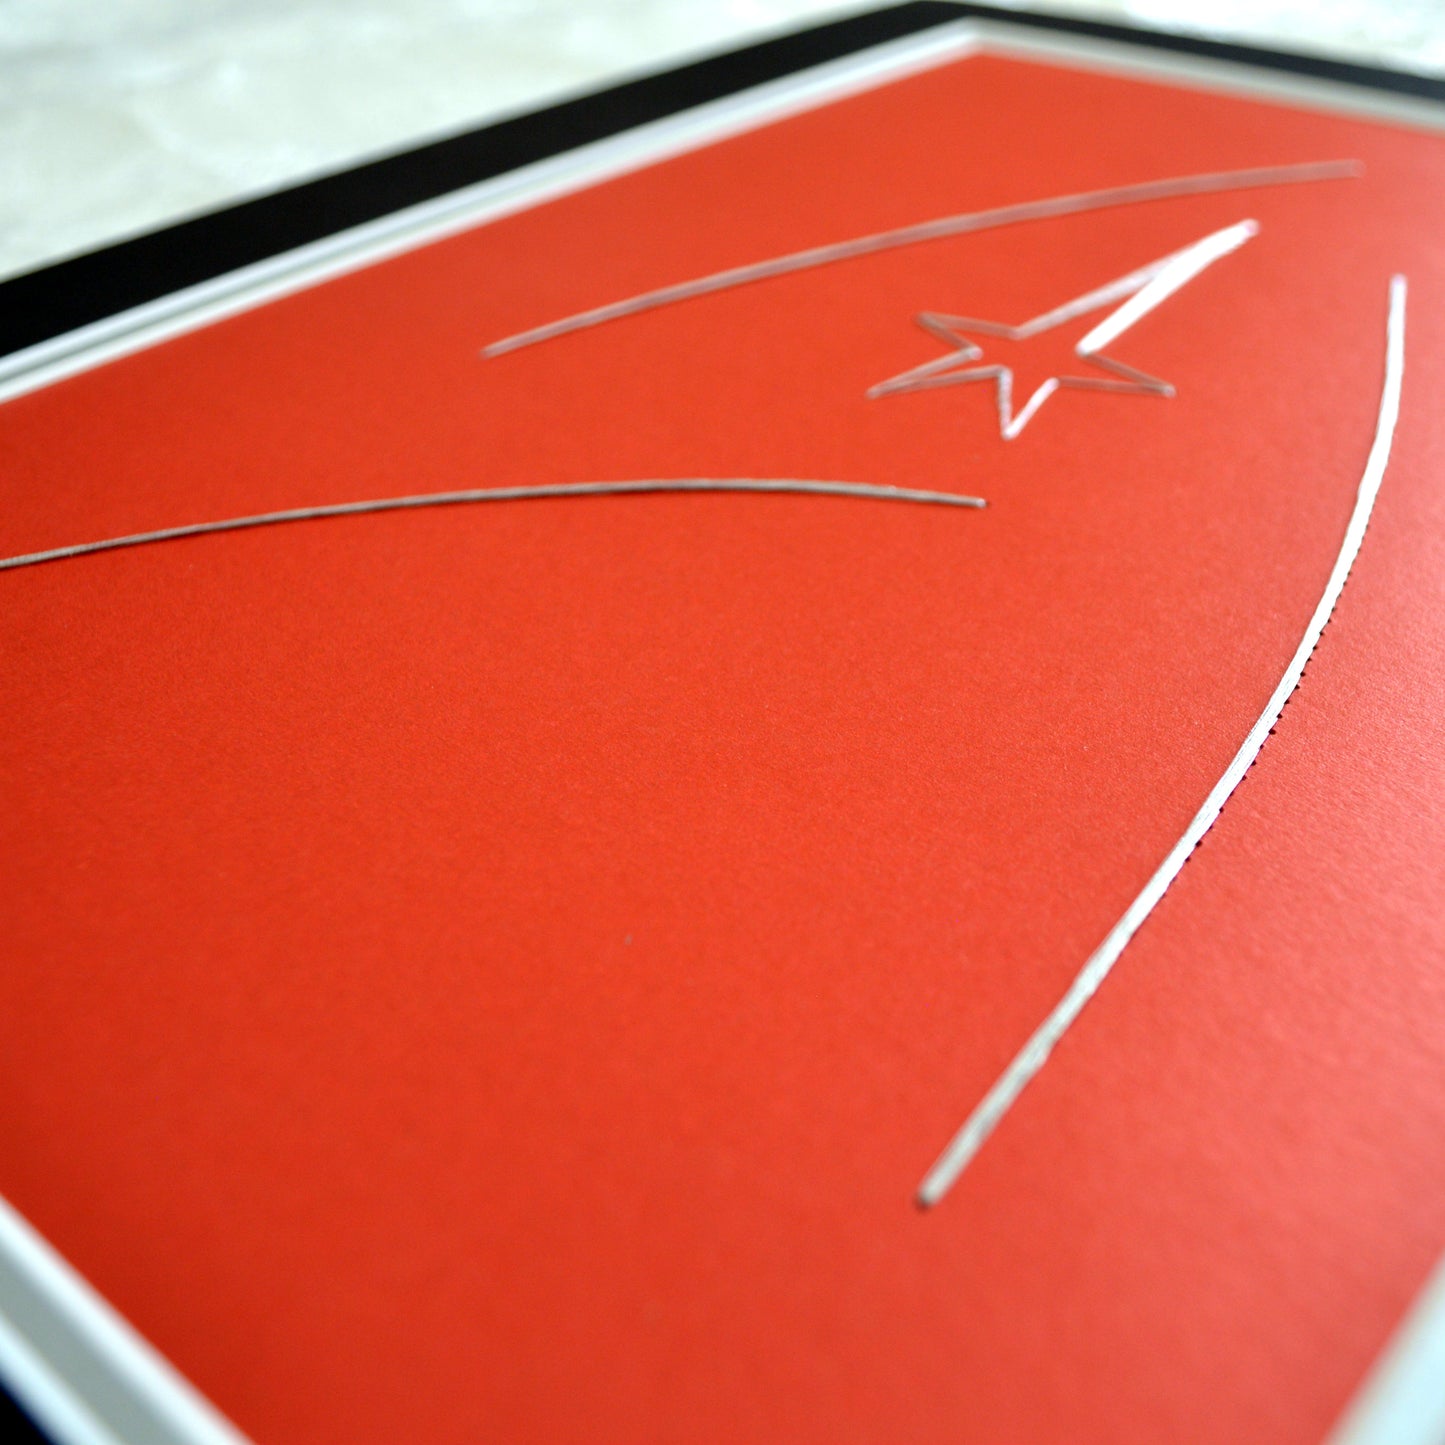 Star Trek Inspired Card Embroidery Kit (Red Shirt Card)